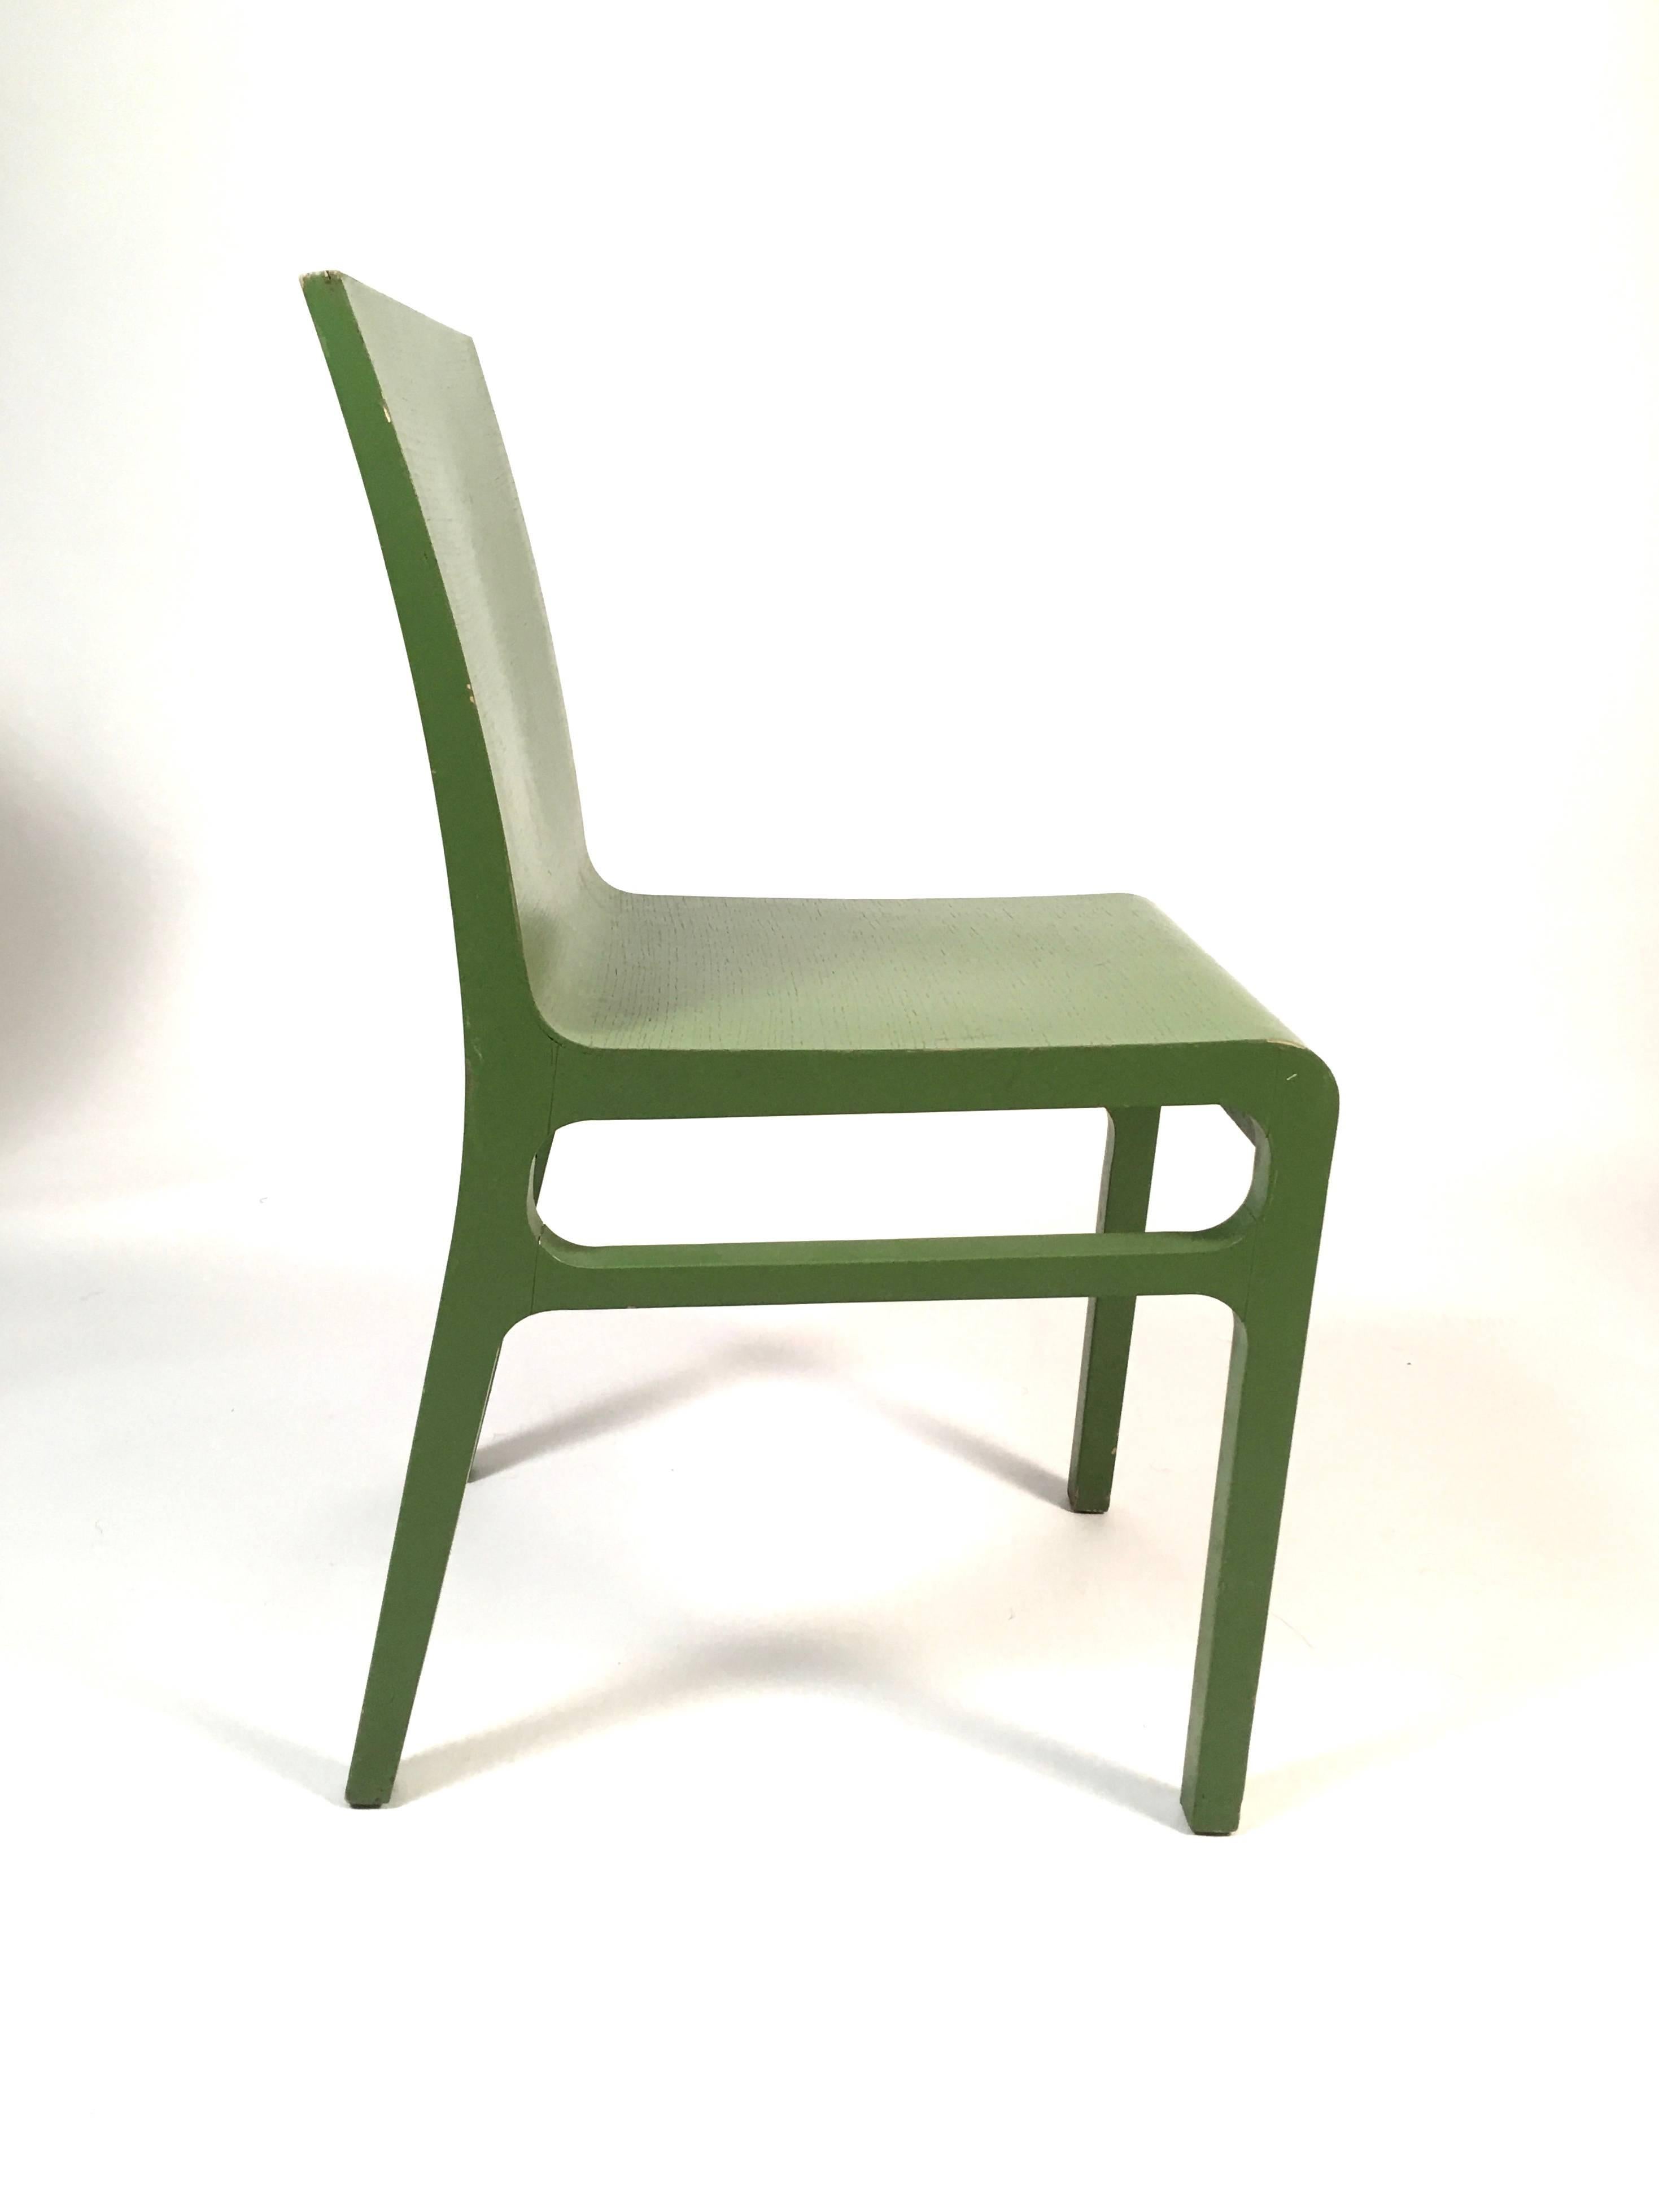 A set of eight Mid-Century Modern bentwood dining chairs from a tea room in England, painted in two different shades of green, four in hunter green and four in apple green, with comfortable curved backs and seats, the legs joined by cross